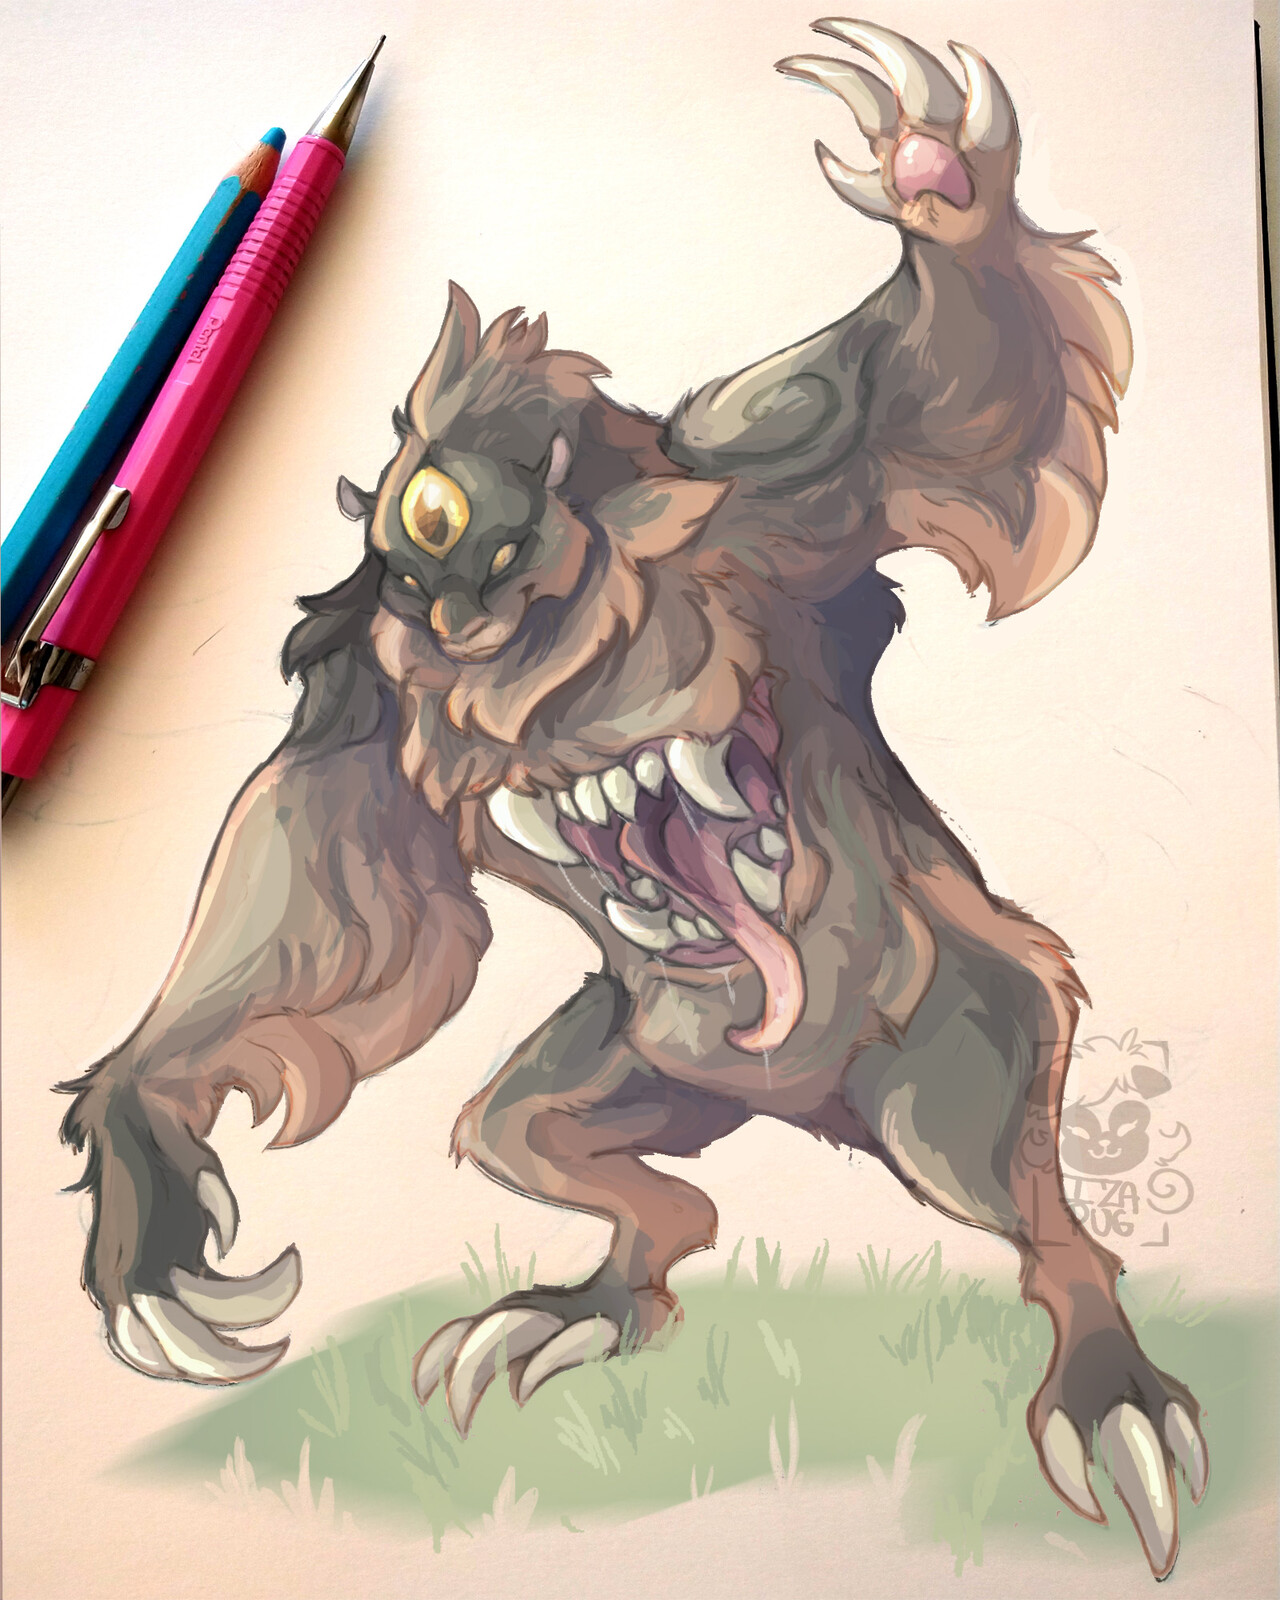 Mapinguari is a legendary creature from the Amazon rainforest. According to legend, this creature devours people who get lost in the forest, but the Mapinguari that I drew is a little more docile, just looking for hugs. 